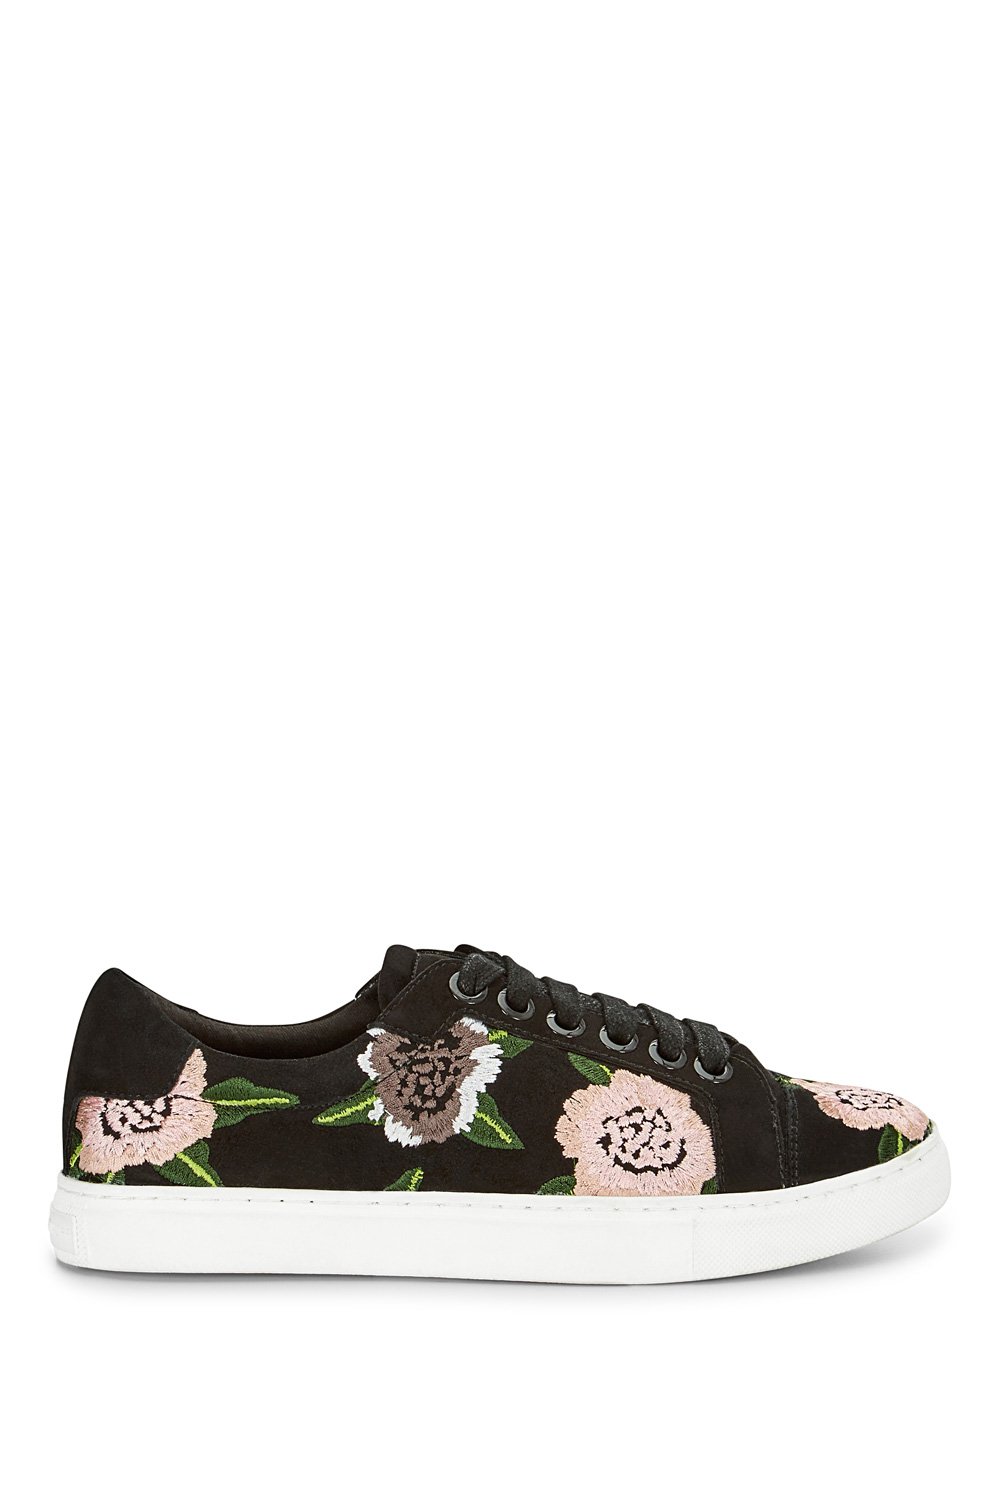 Bleecker Floral Embroidery Sneaker